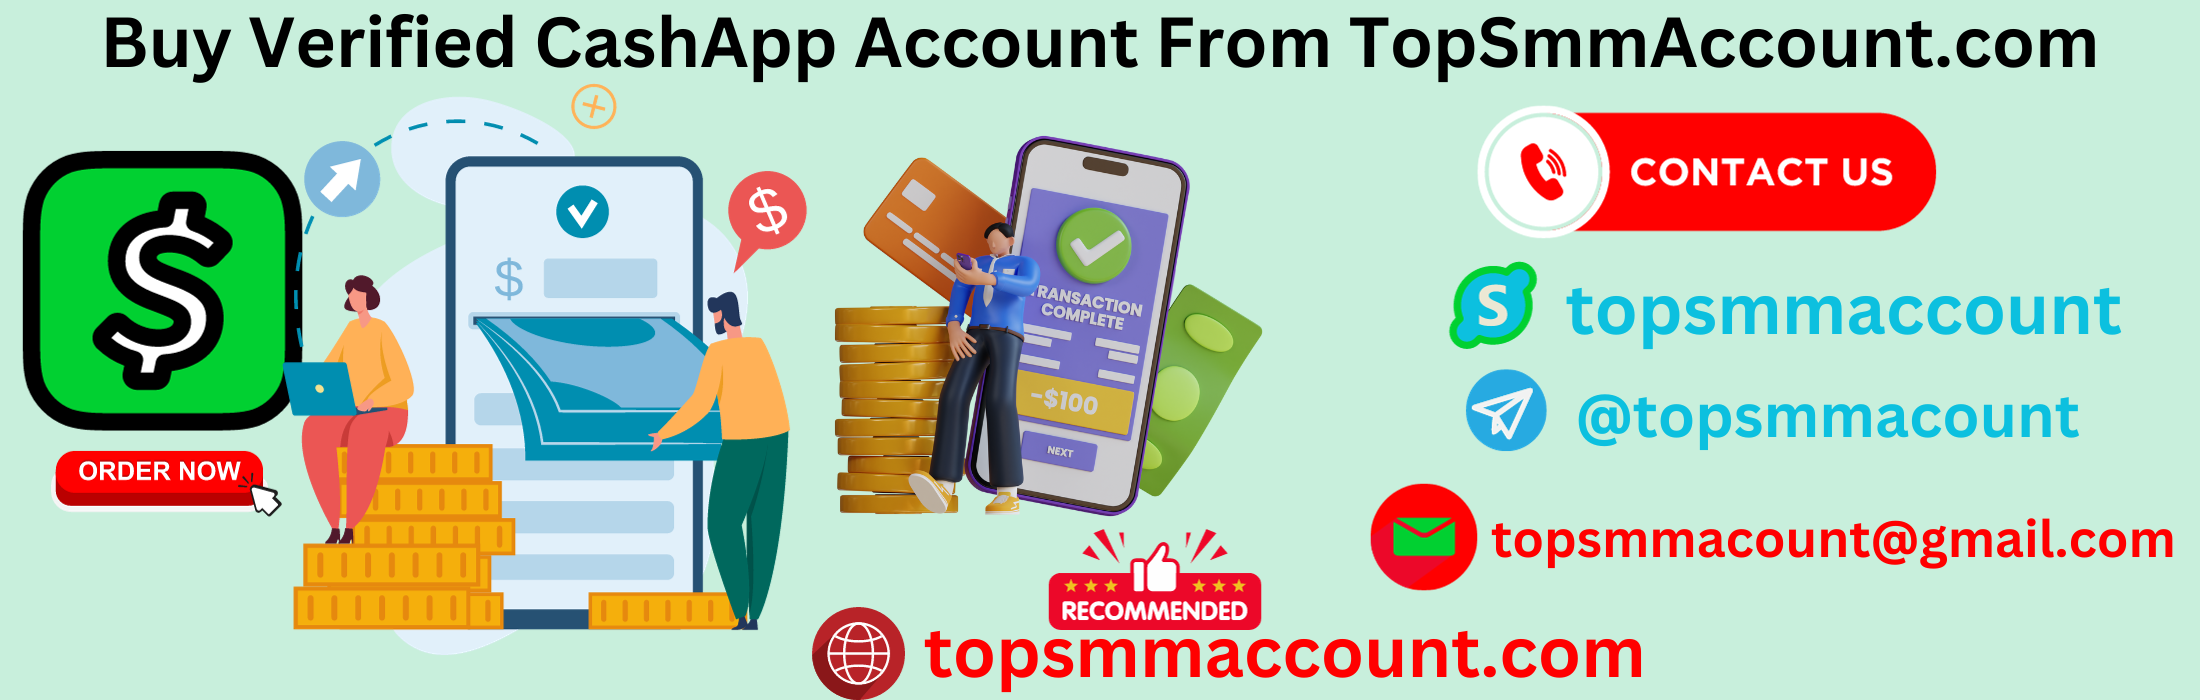 Boost your financial trust with TopsMMAccount.com – your go-to for verified Cash App accounts. Transparent, secure, and affordable services tailored to your needs. Elevate your confidence in digital transactions today.